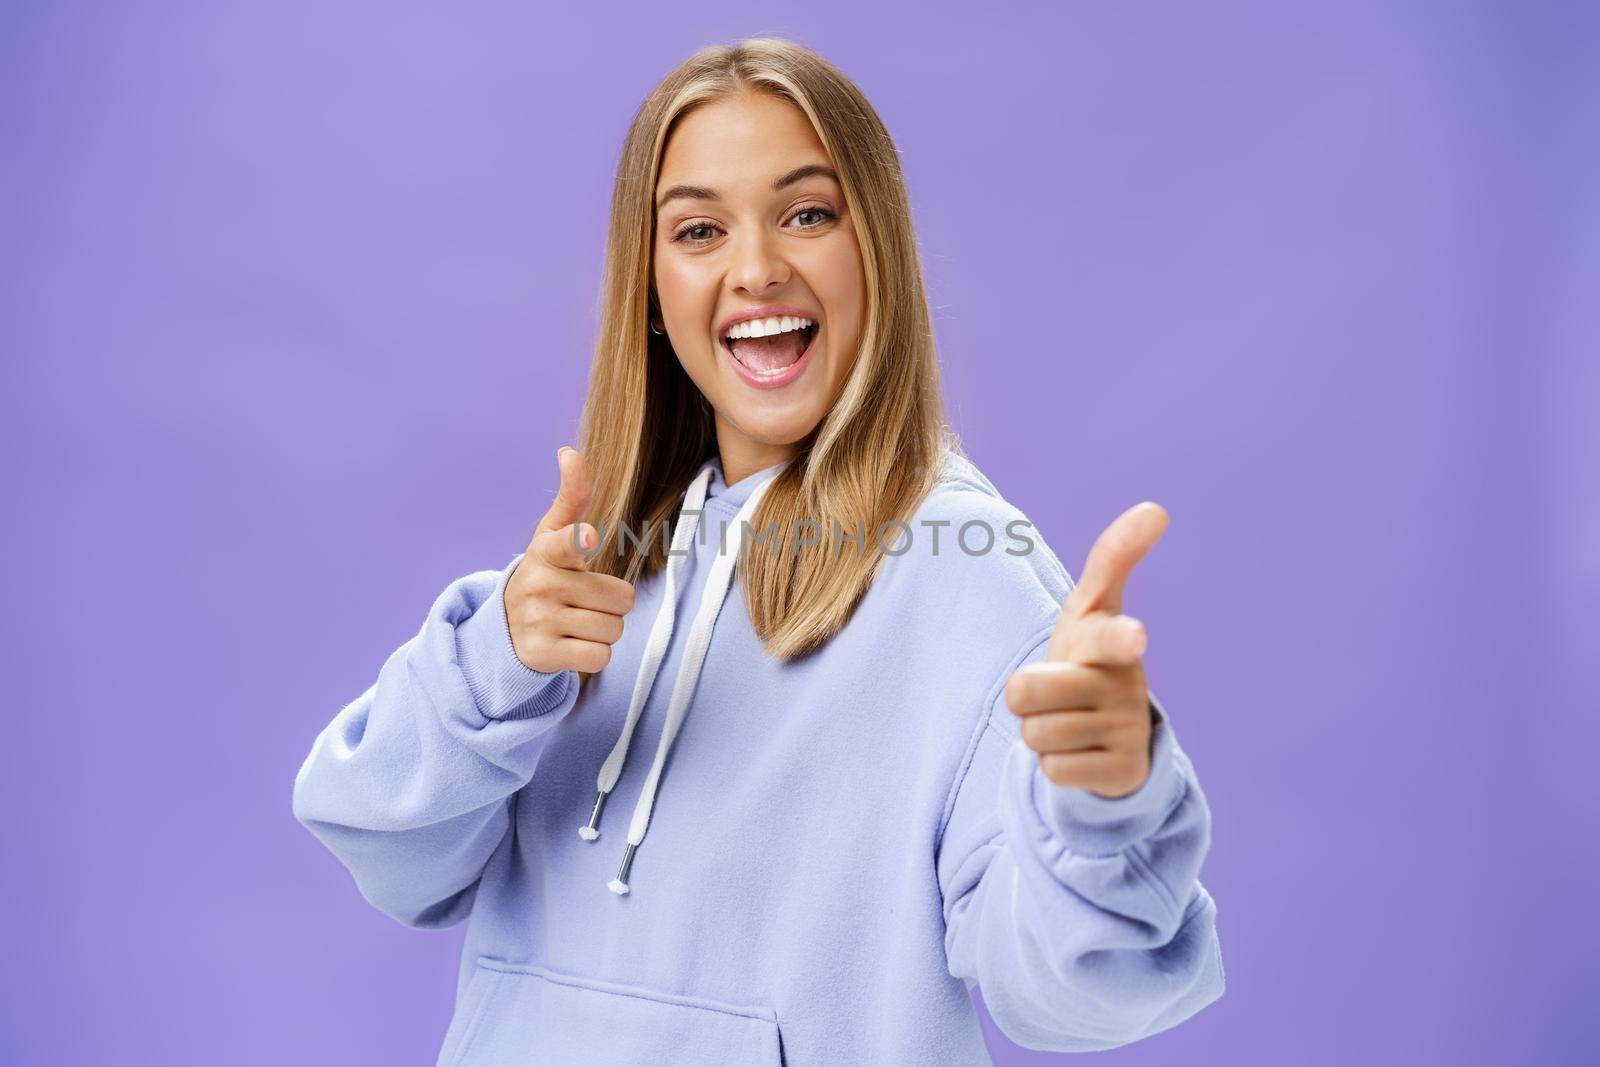 Enthusiastic and charismatic woman feeling joyful meeting friends checking out cool copy space pointing with finger guns at camera smiling broadly posing in stylish hoodie over purple wall. Copy space